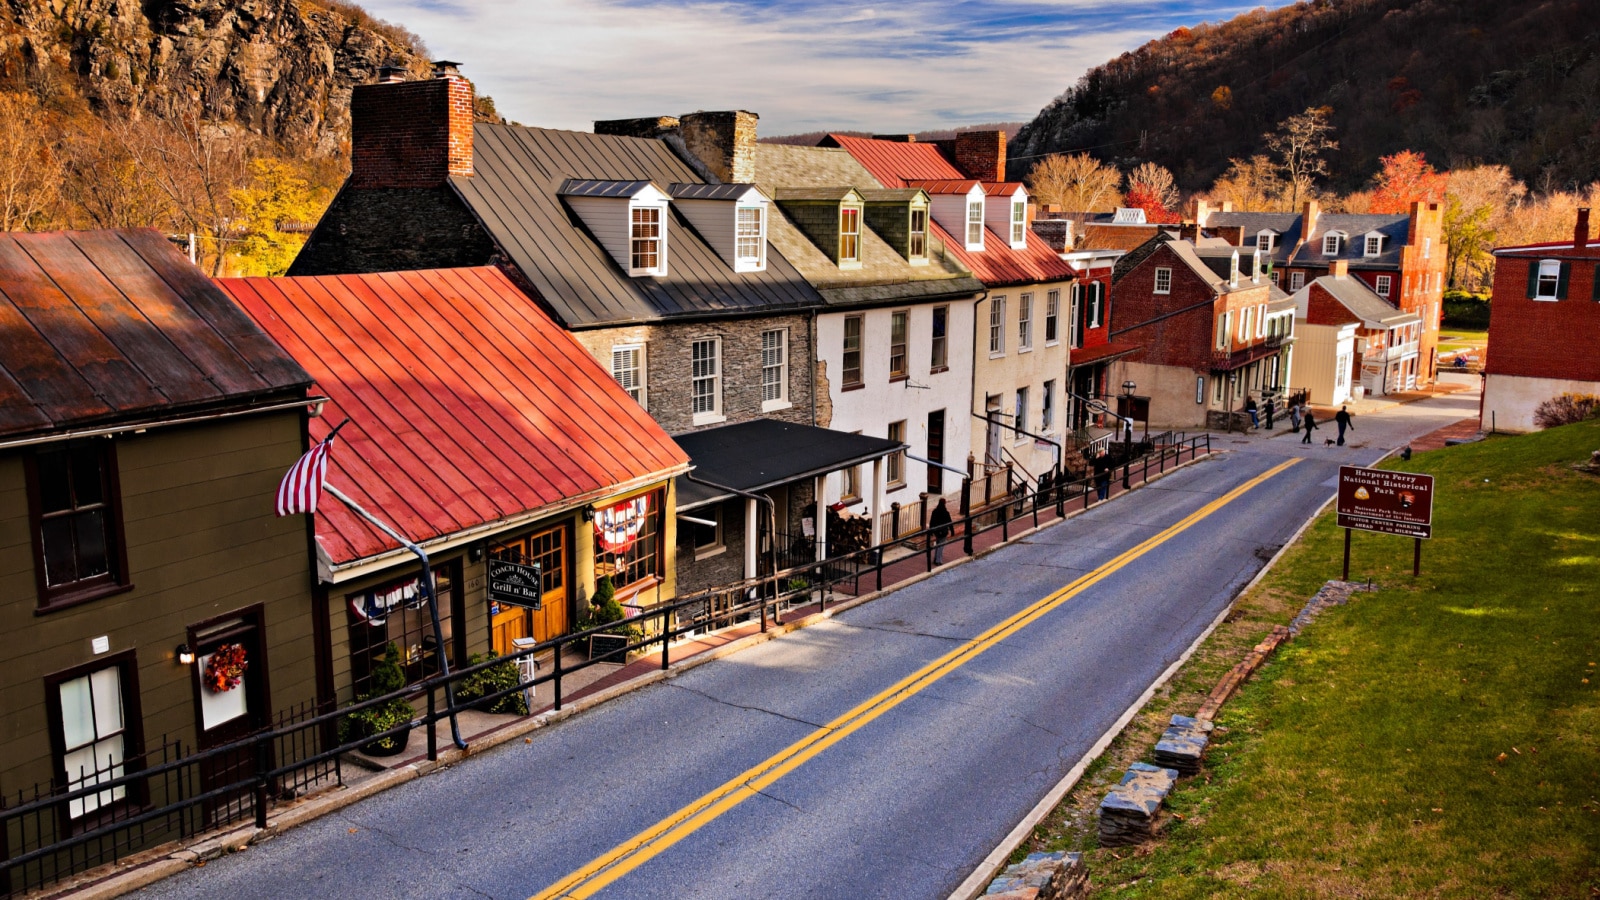 Historic buildings and shops on High Street in Harper's Ferry, West Virginia.